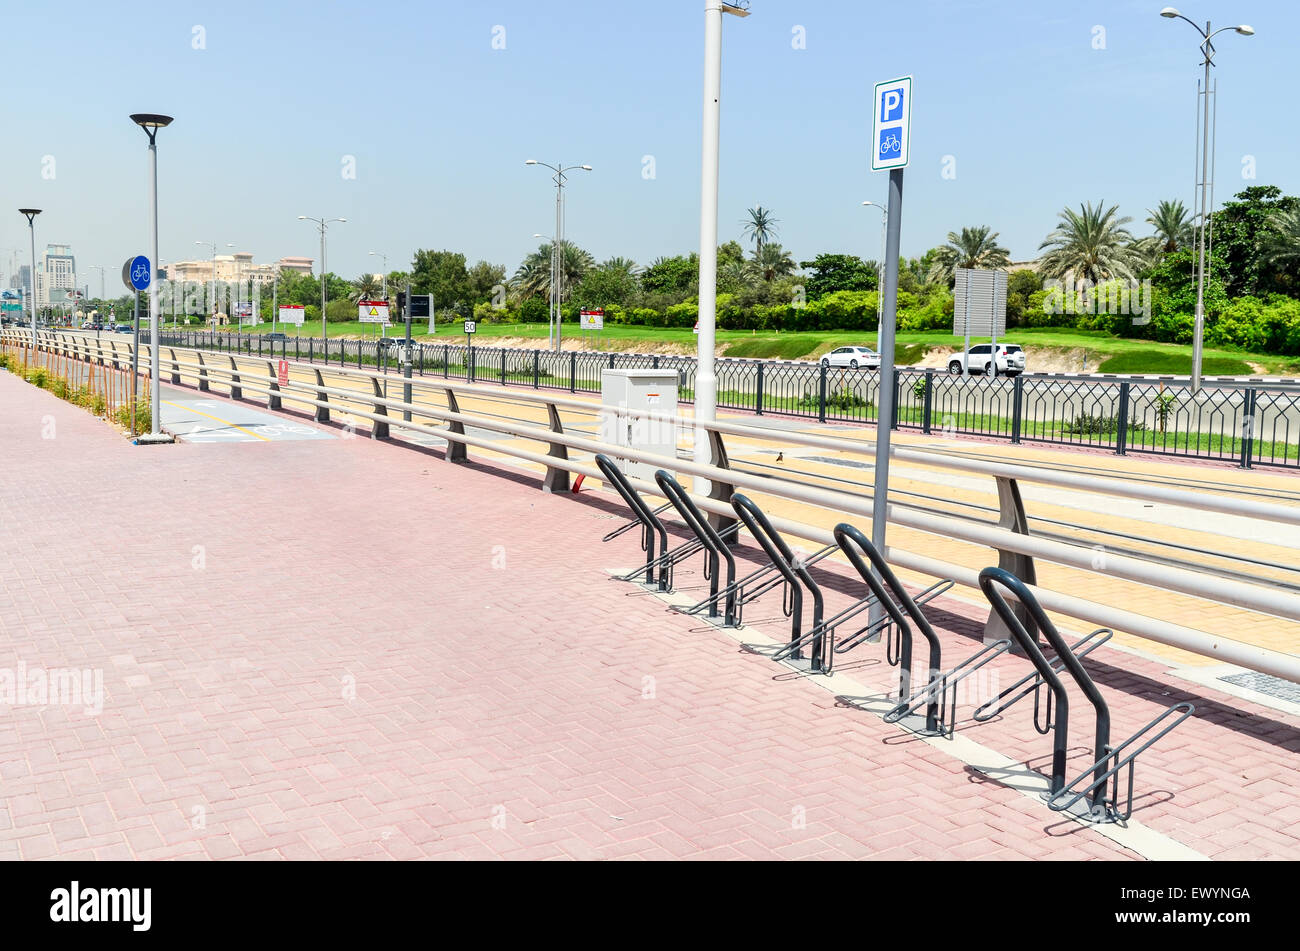 Empty bicycle parking places in very hot Dubai Stock Photo - Alamy